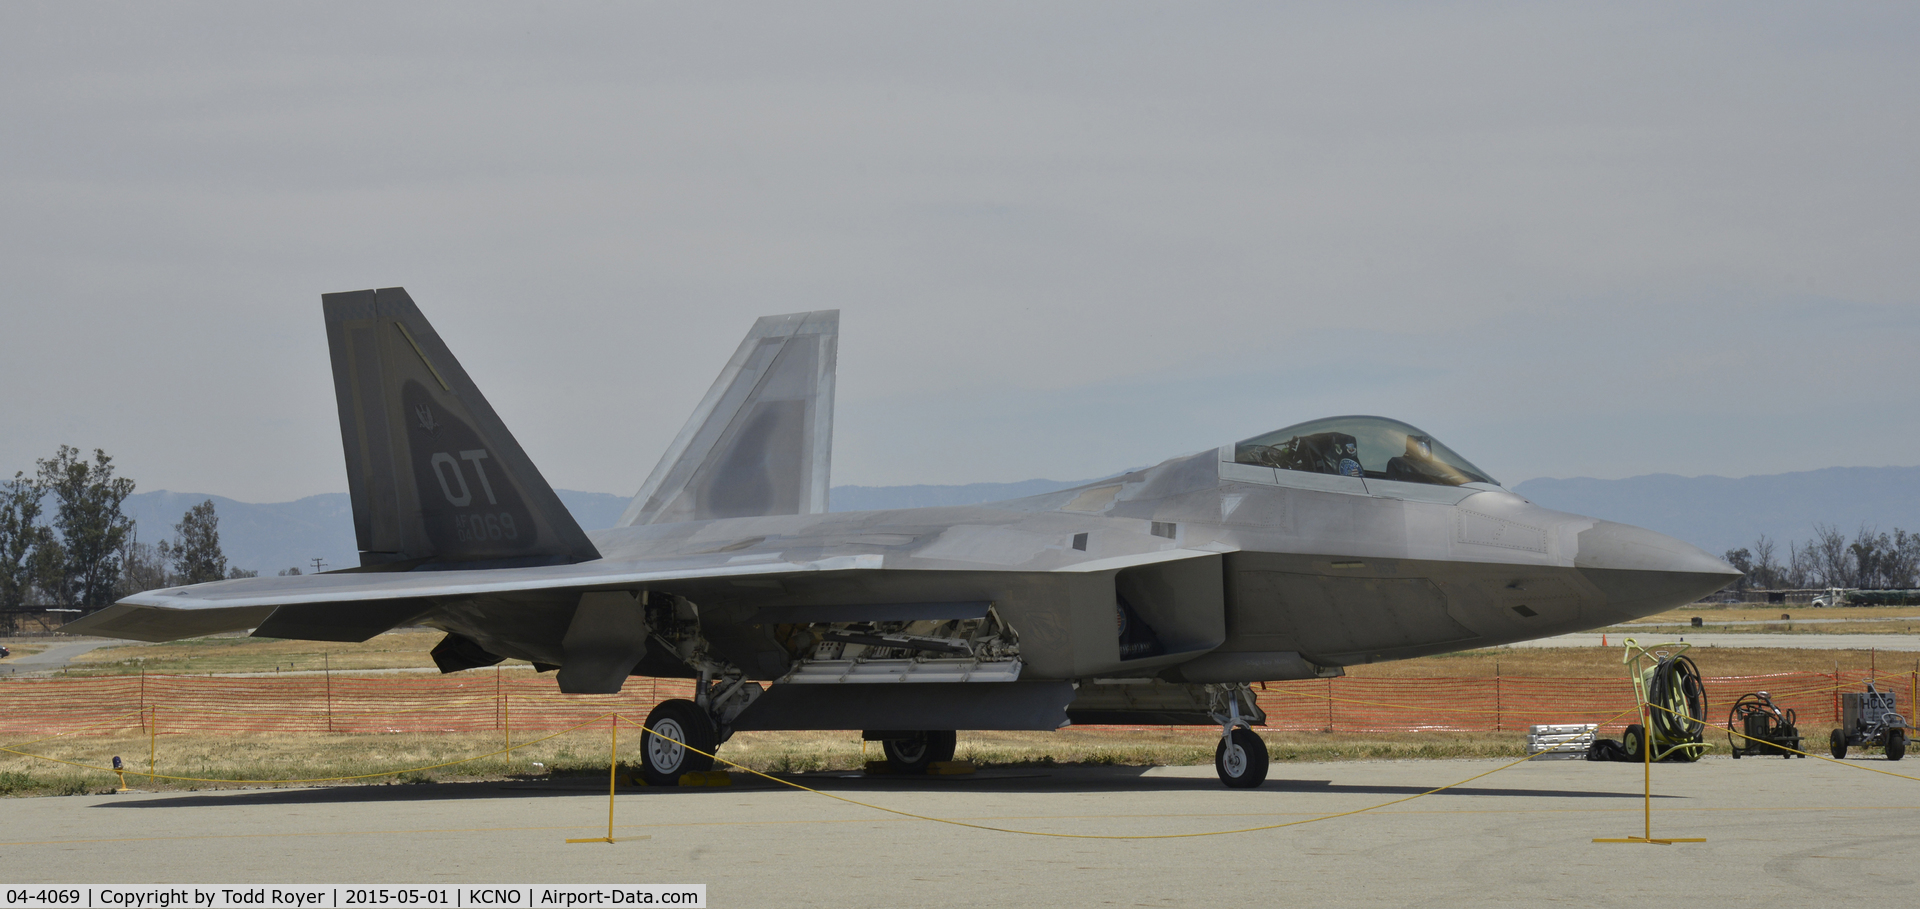 04-4069, 2004 Lockheed Martin F-22A Raptor C/N 4069, On display at the 2015 Planes of Fame Airshow